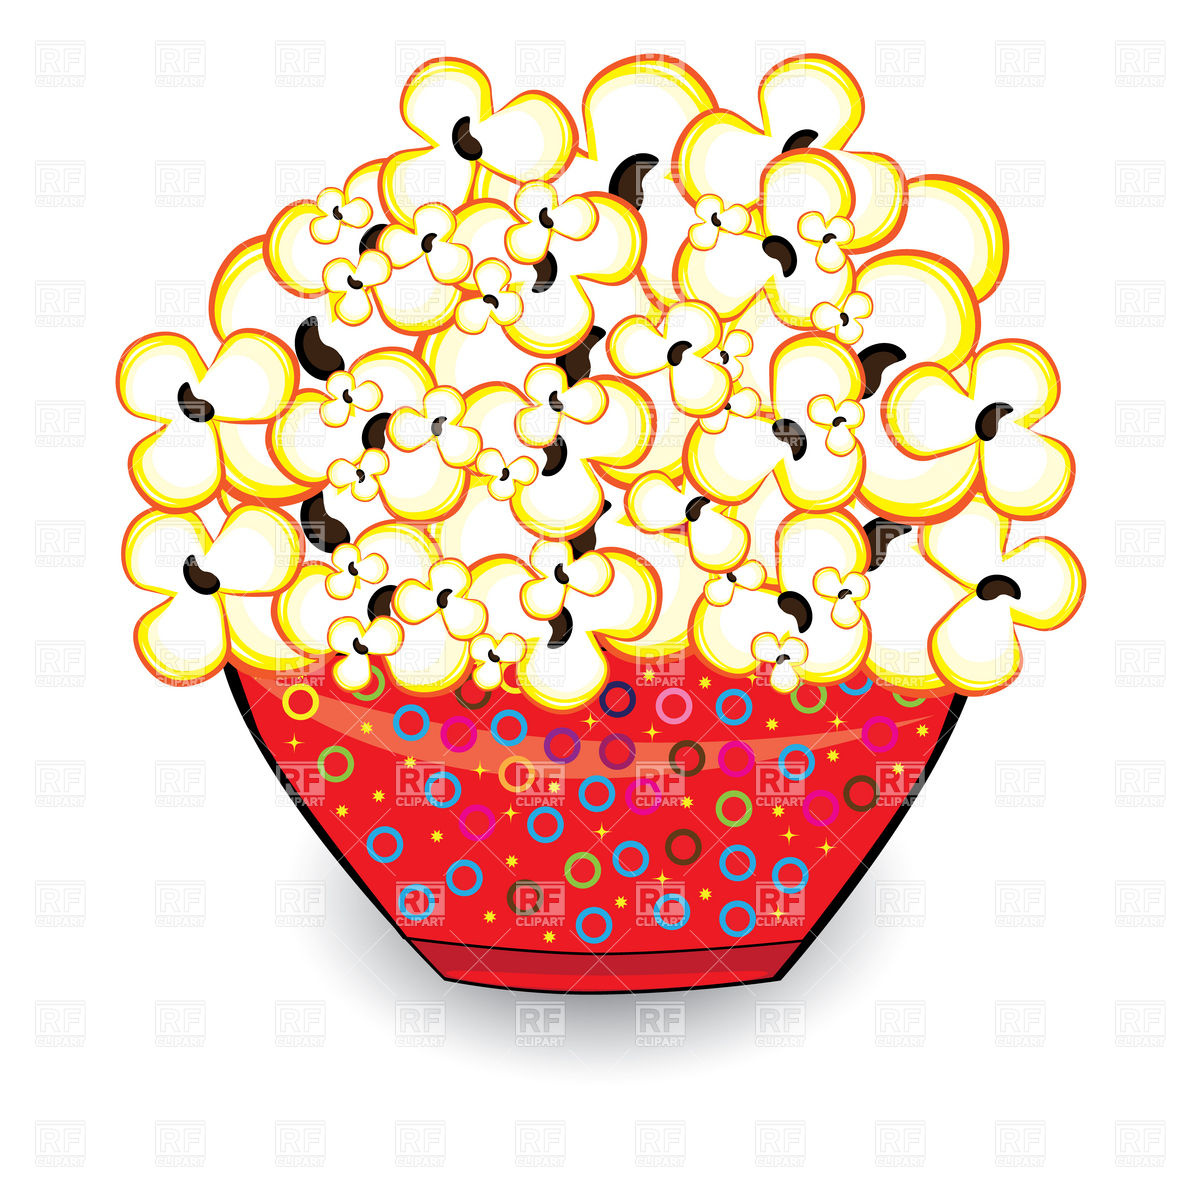 Popcorn kernel border clipart free clipart images cliparts and